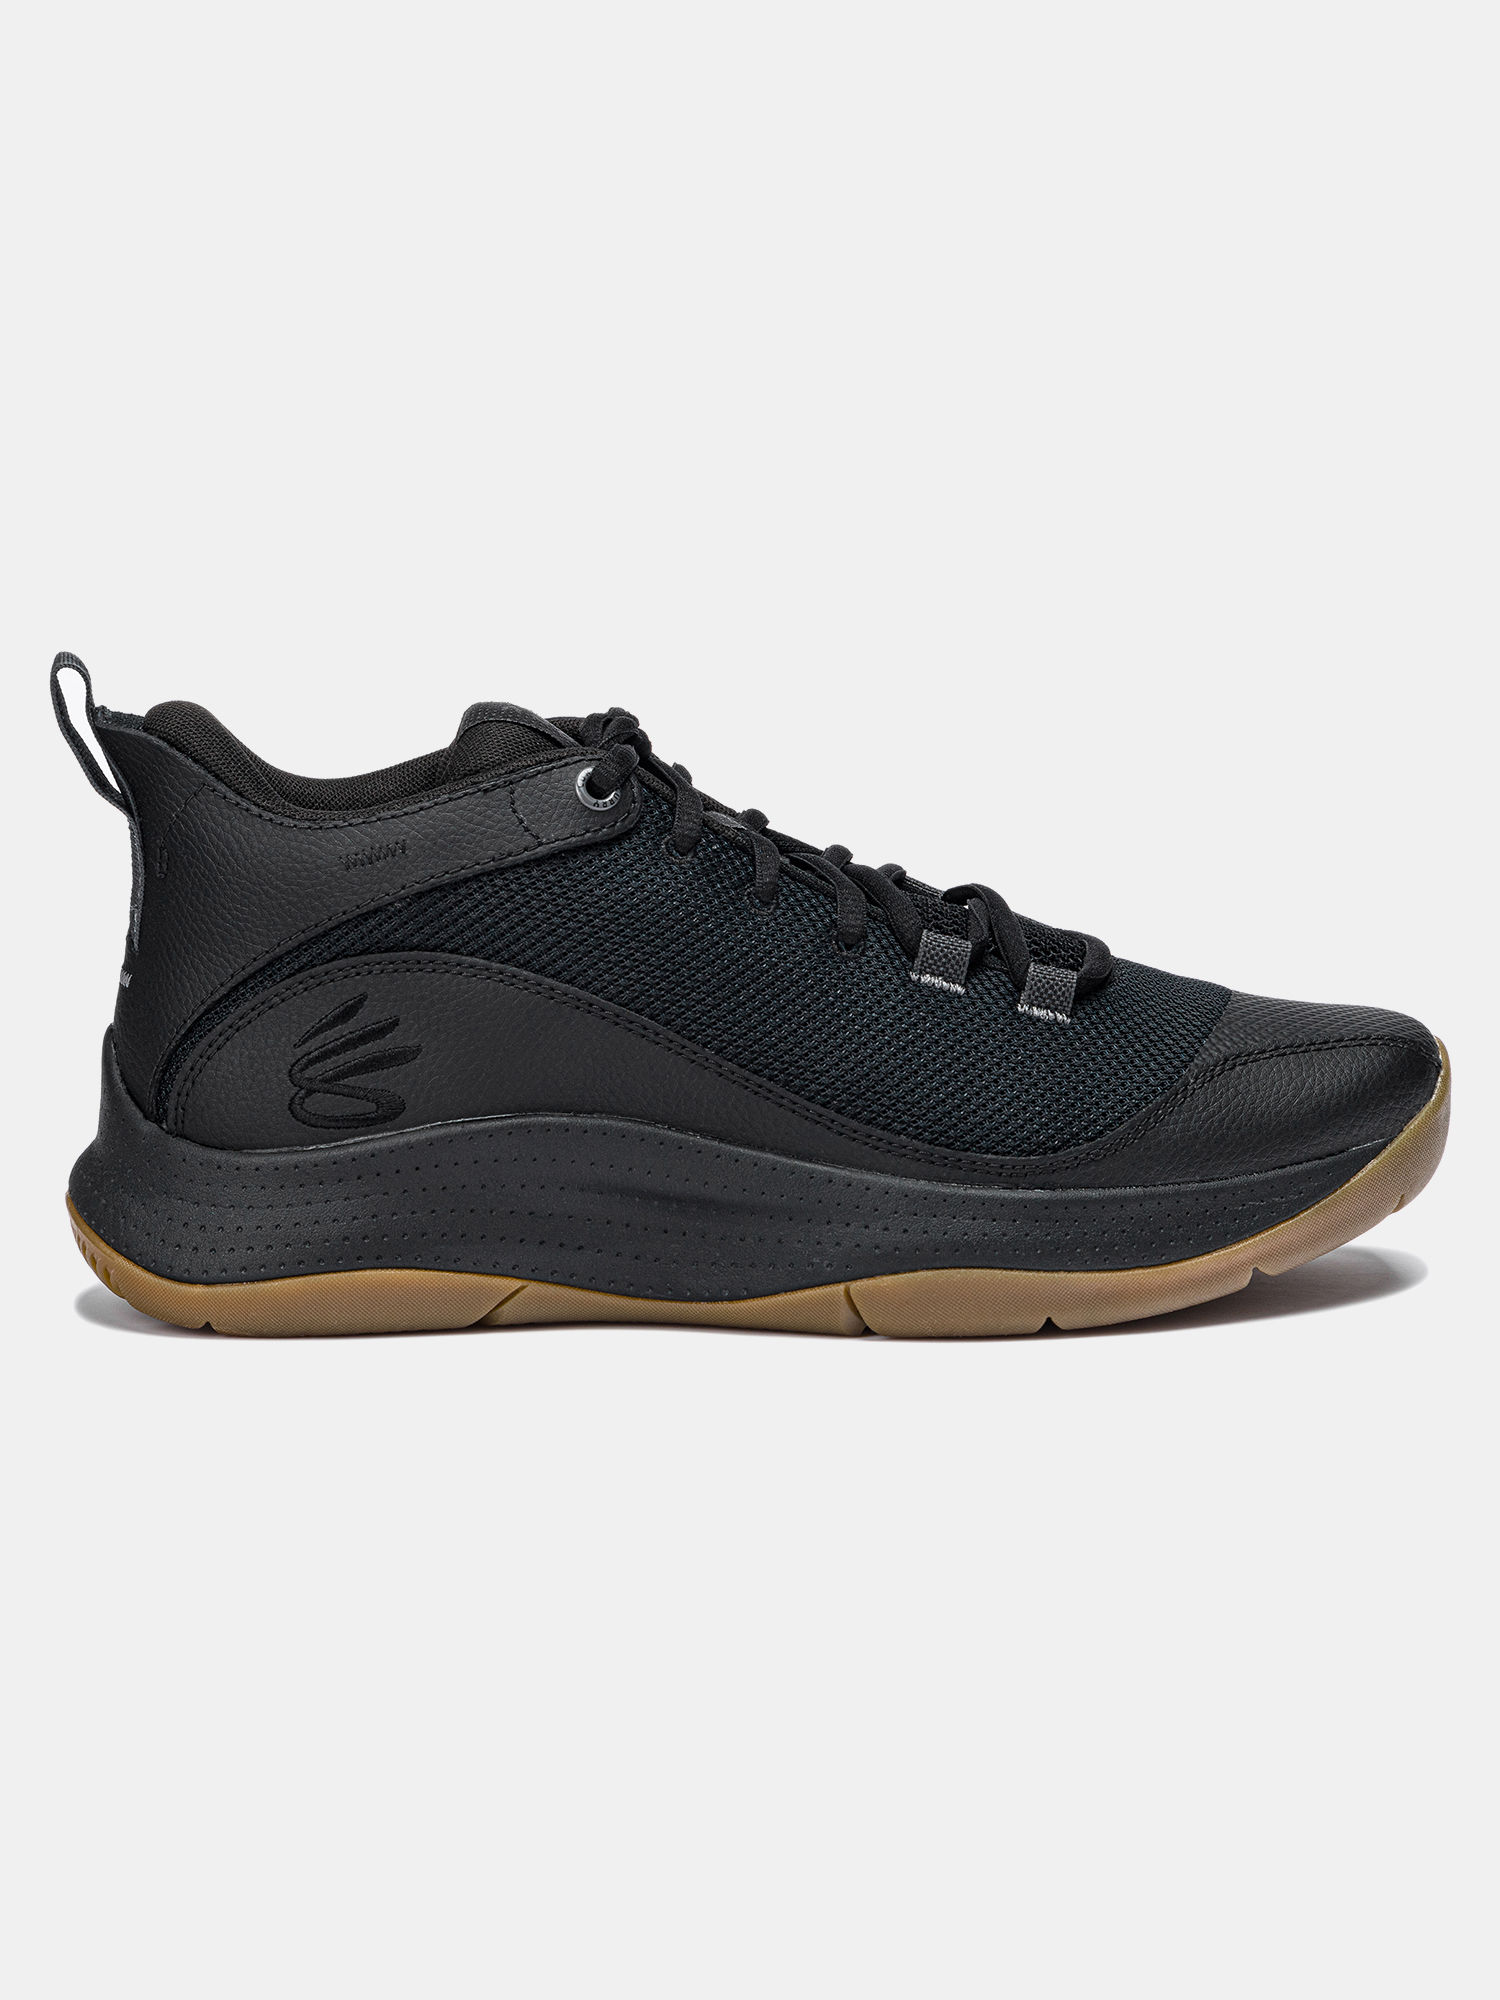 Boty Under Armour 3Z5-BLK (1)